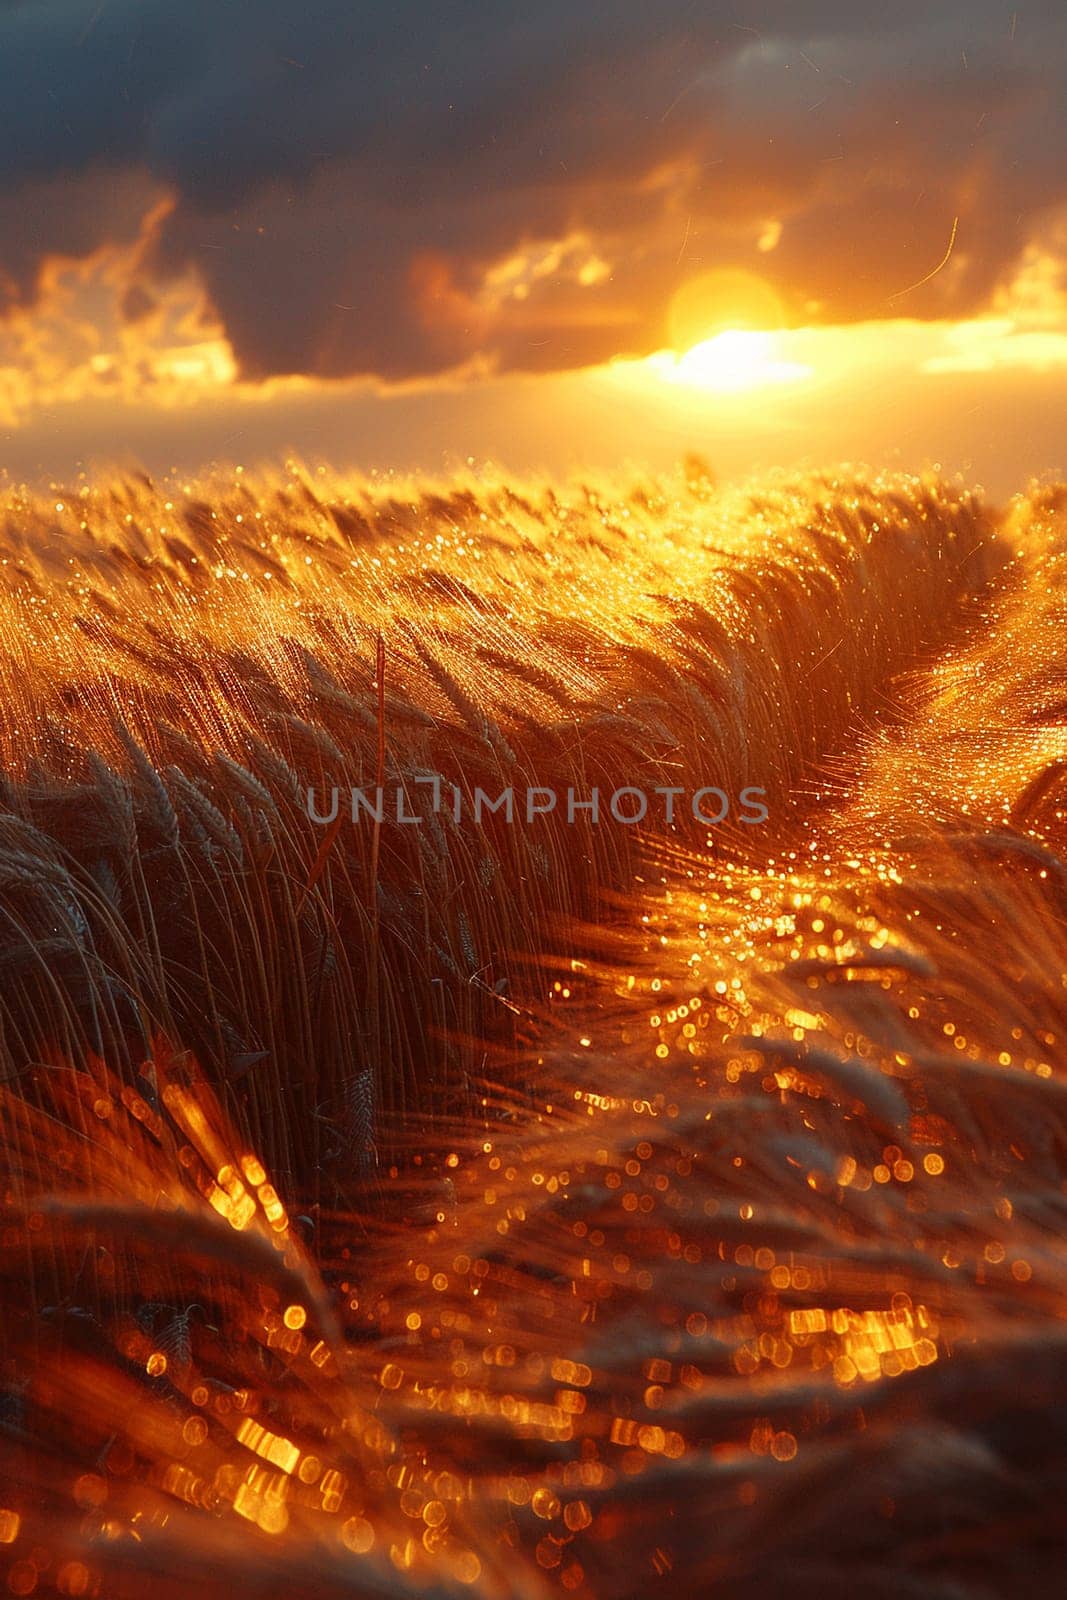 Waves of grain in a field at sunset, symbolizing abundance and the natural world.